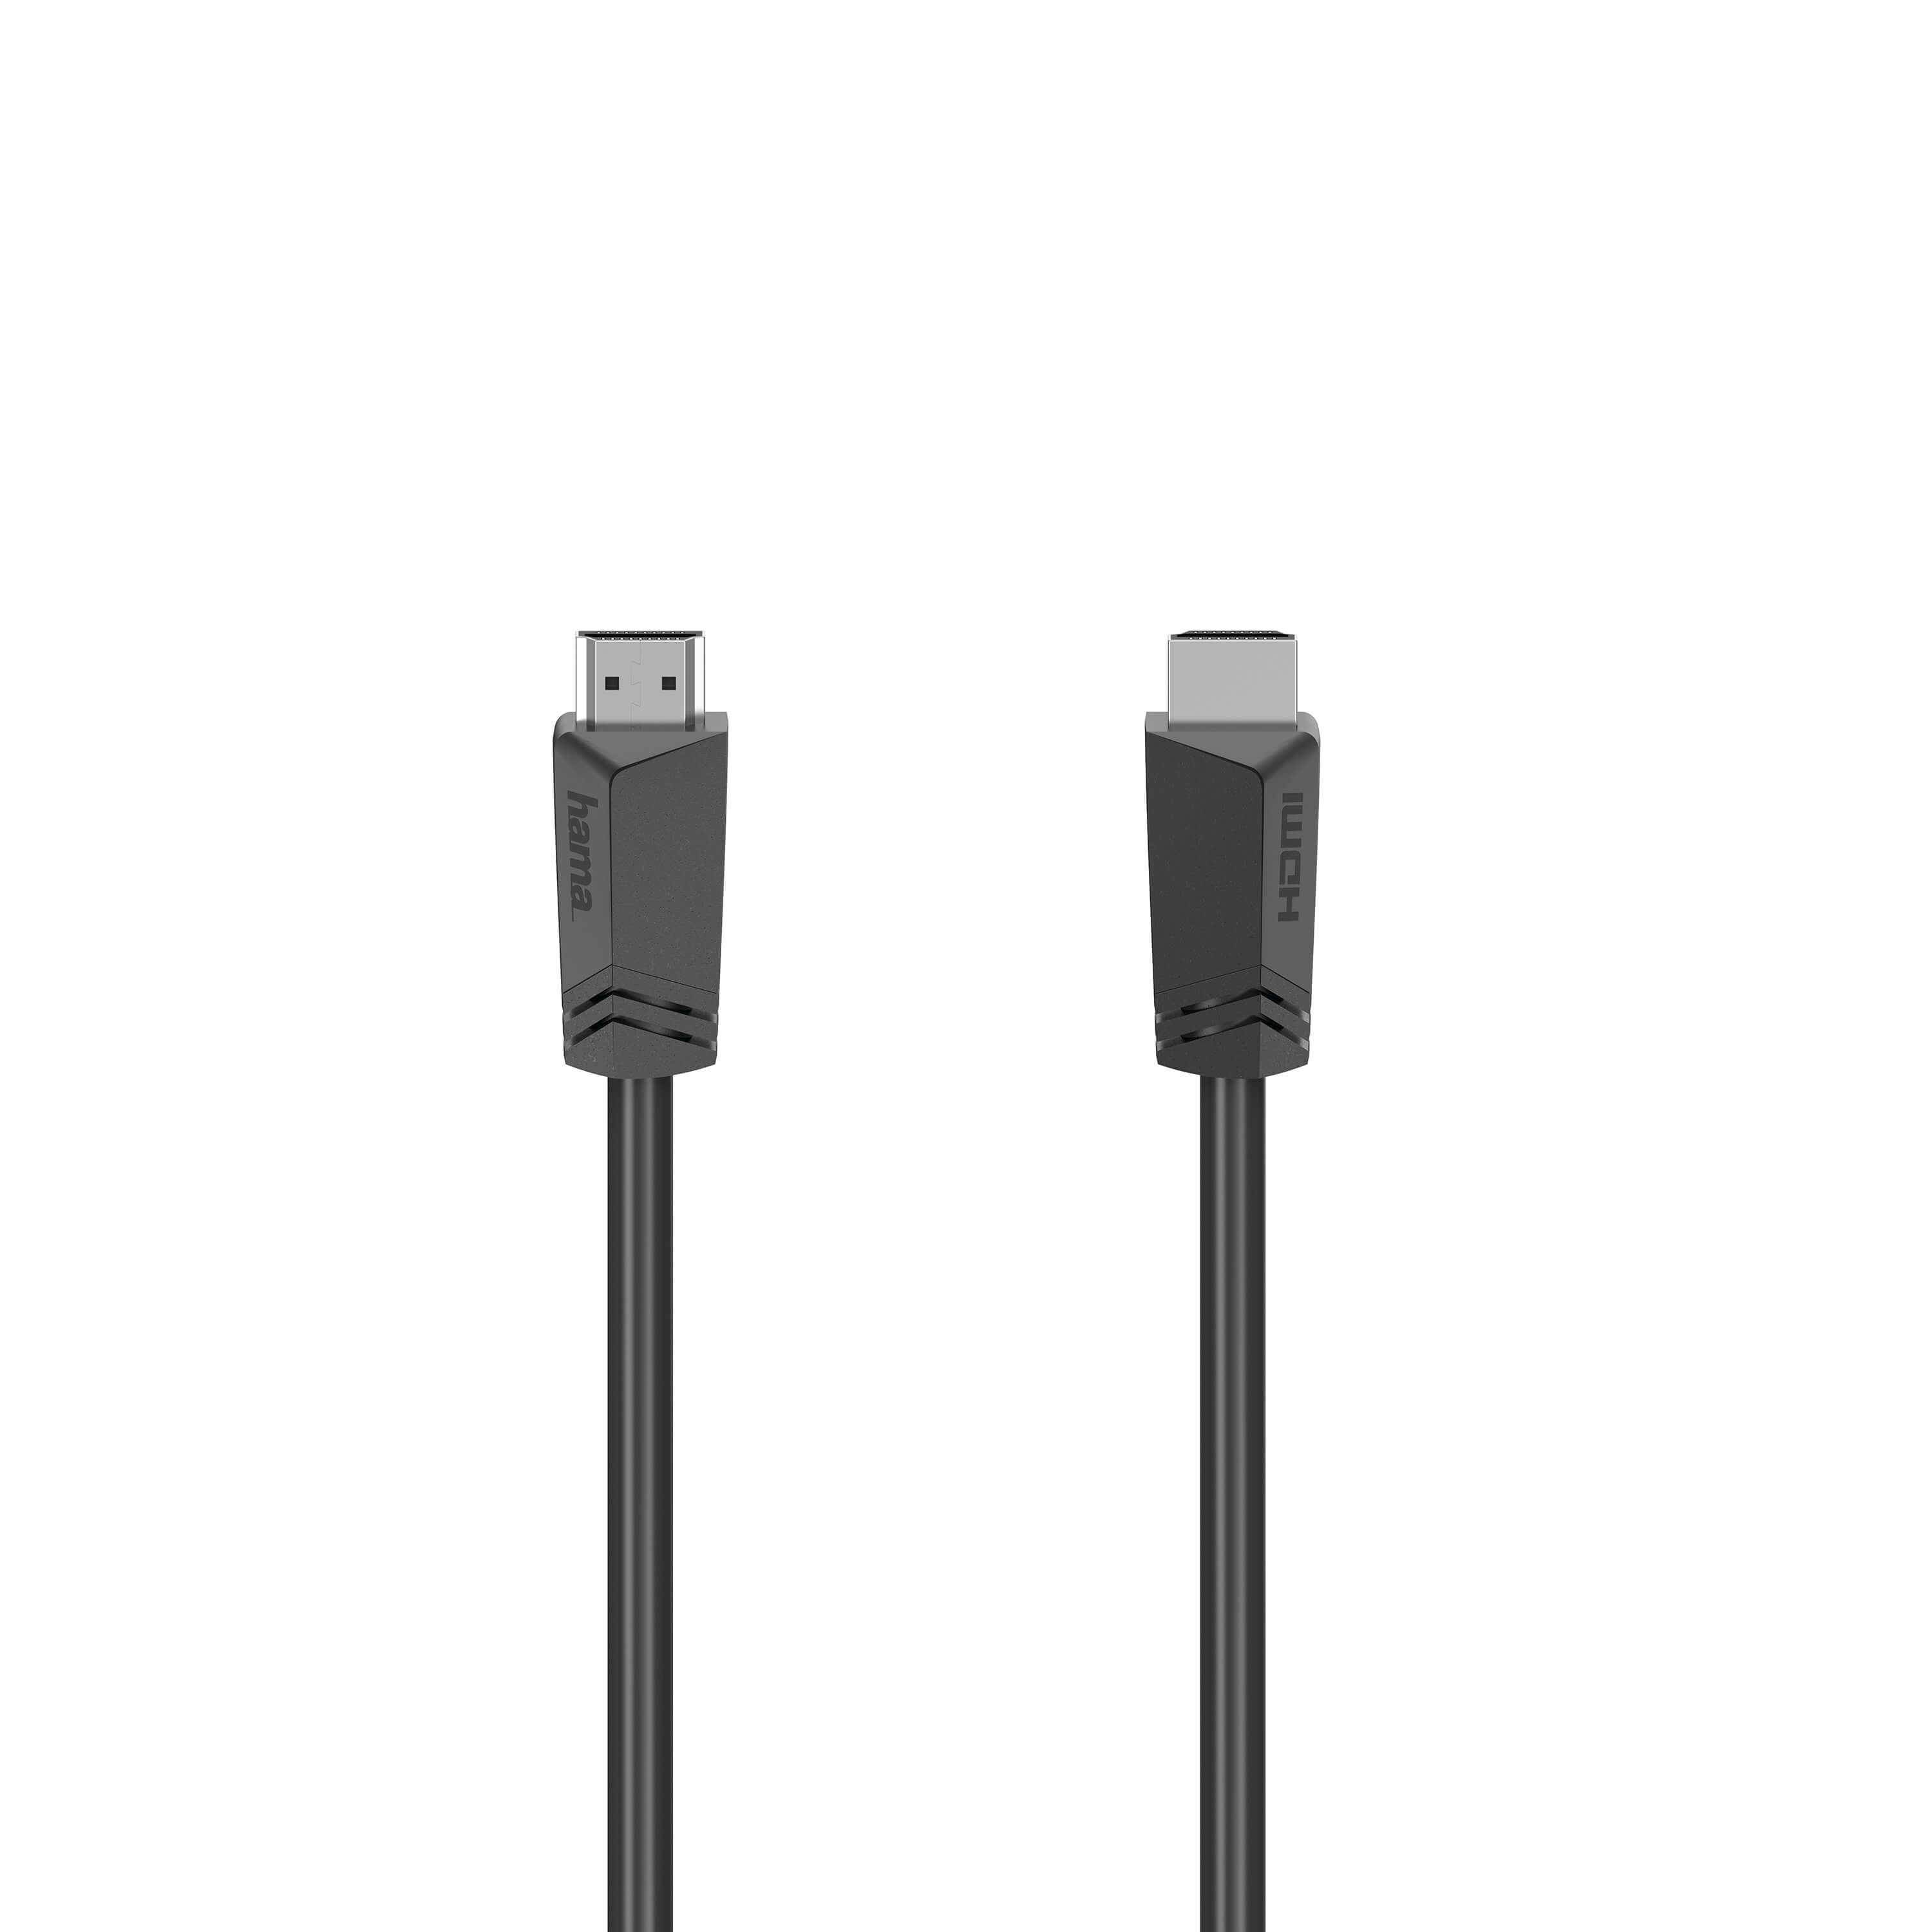 HAMA HDI Cable Ethernet Black 1.5m